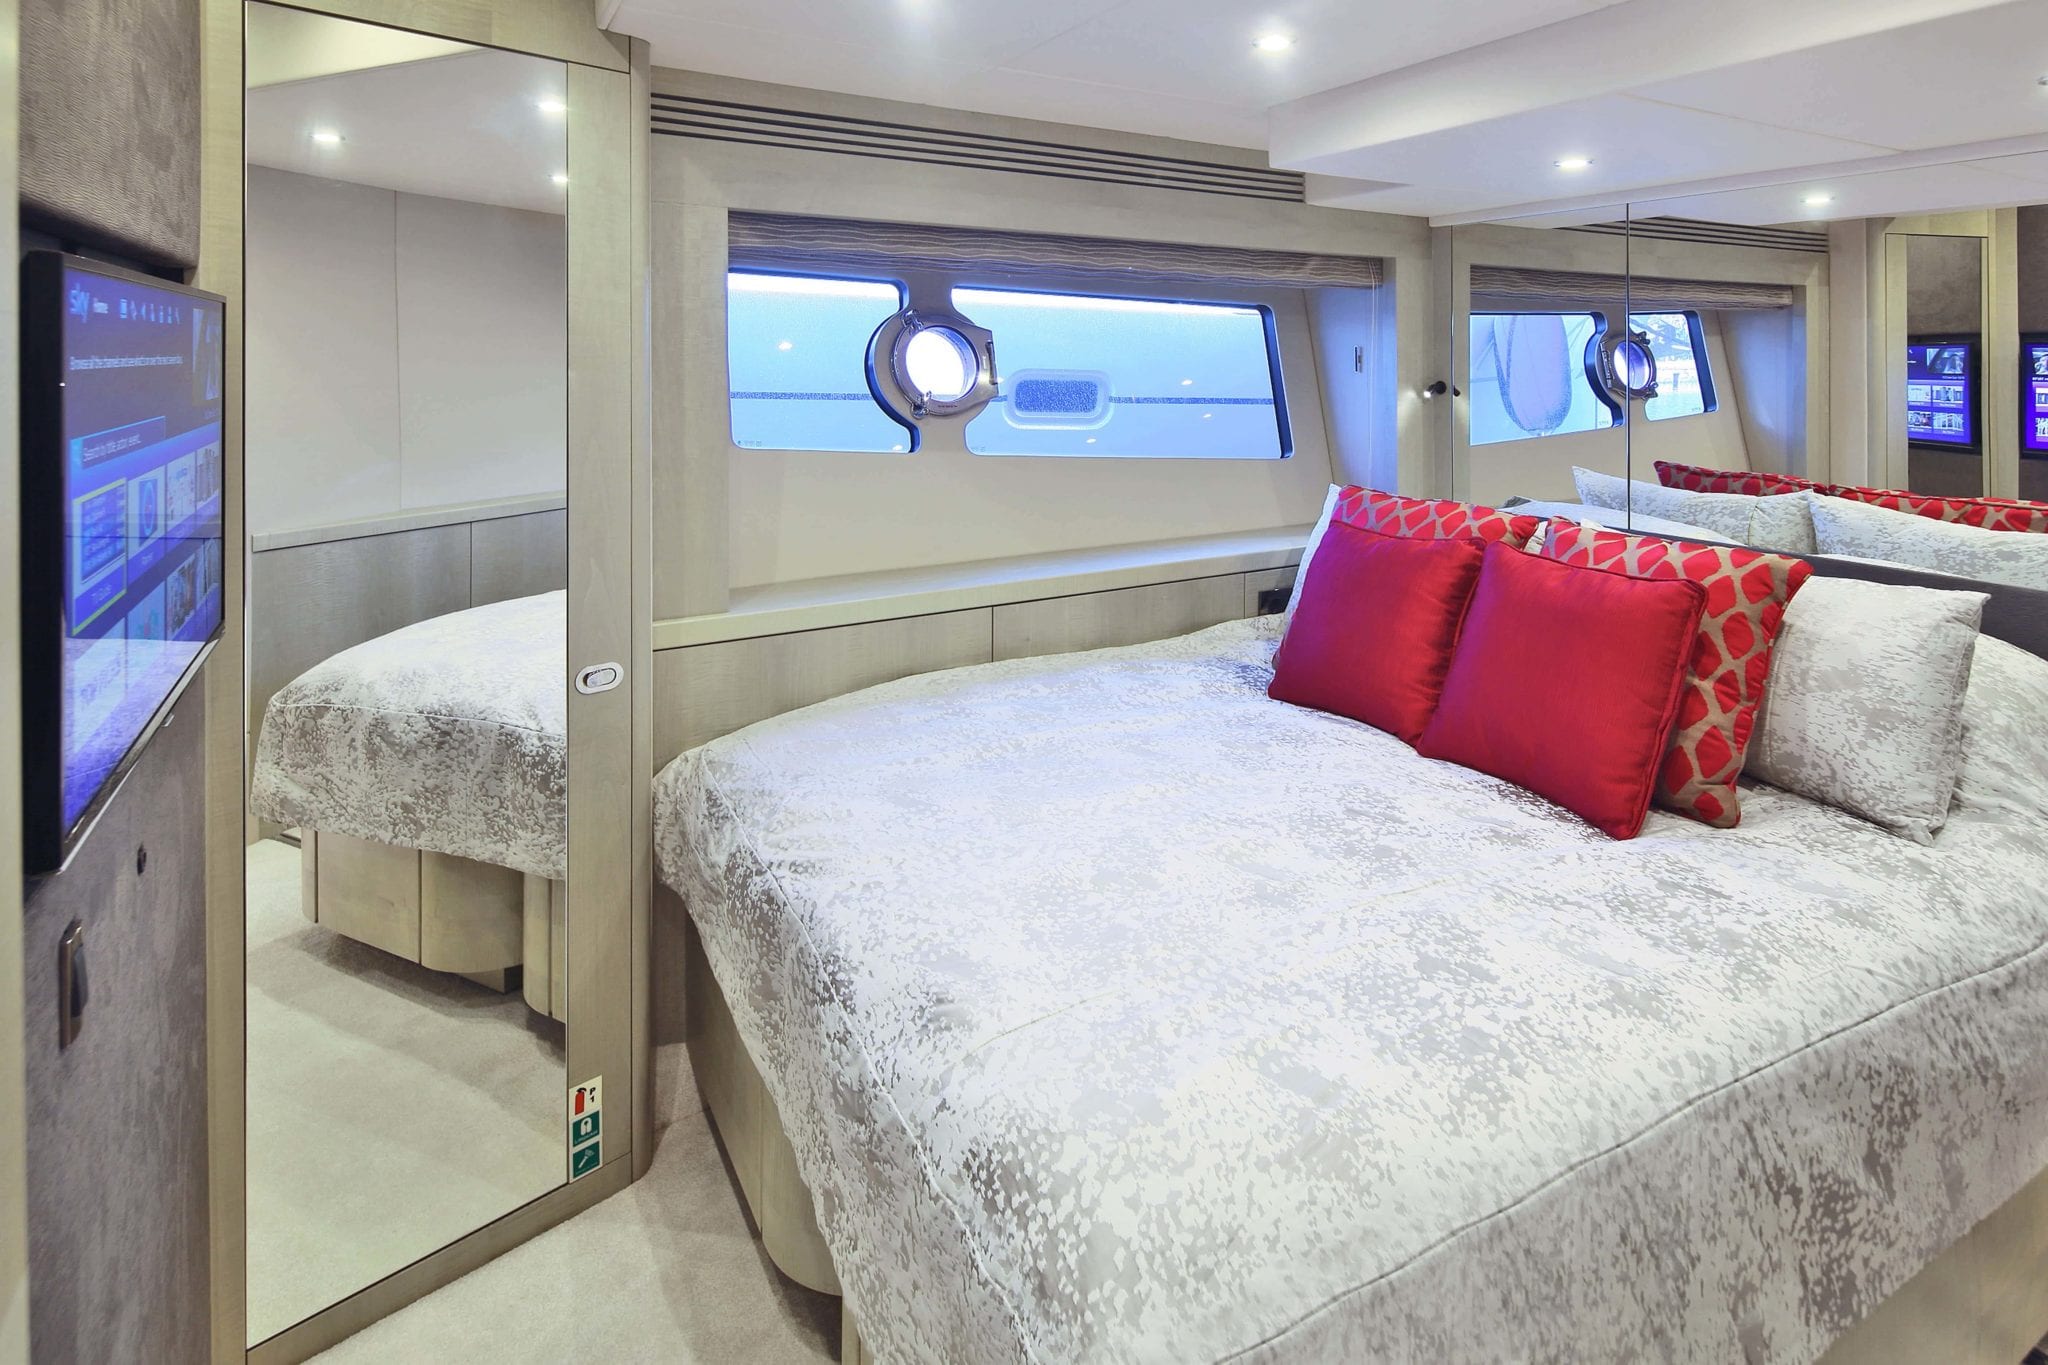 A closer look at one of the en-suite rooms onboard the luxury sunseeker yacht.